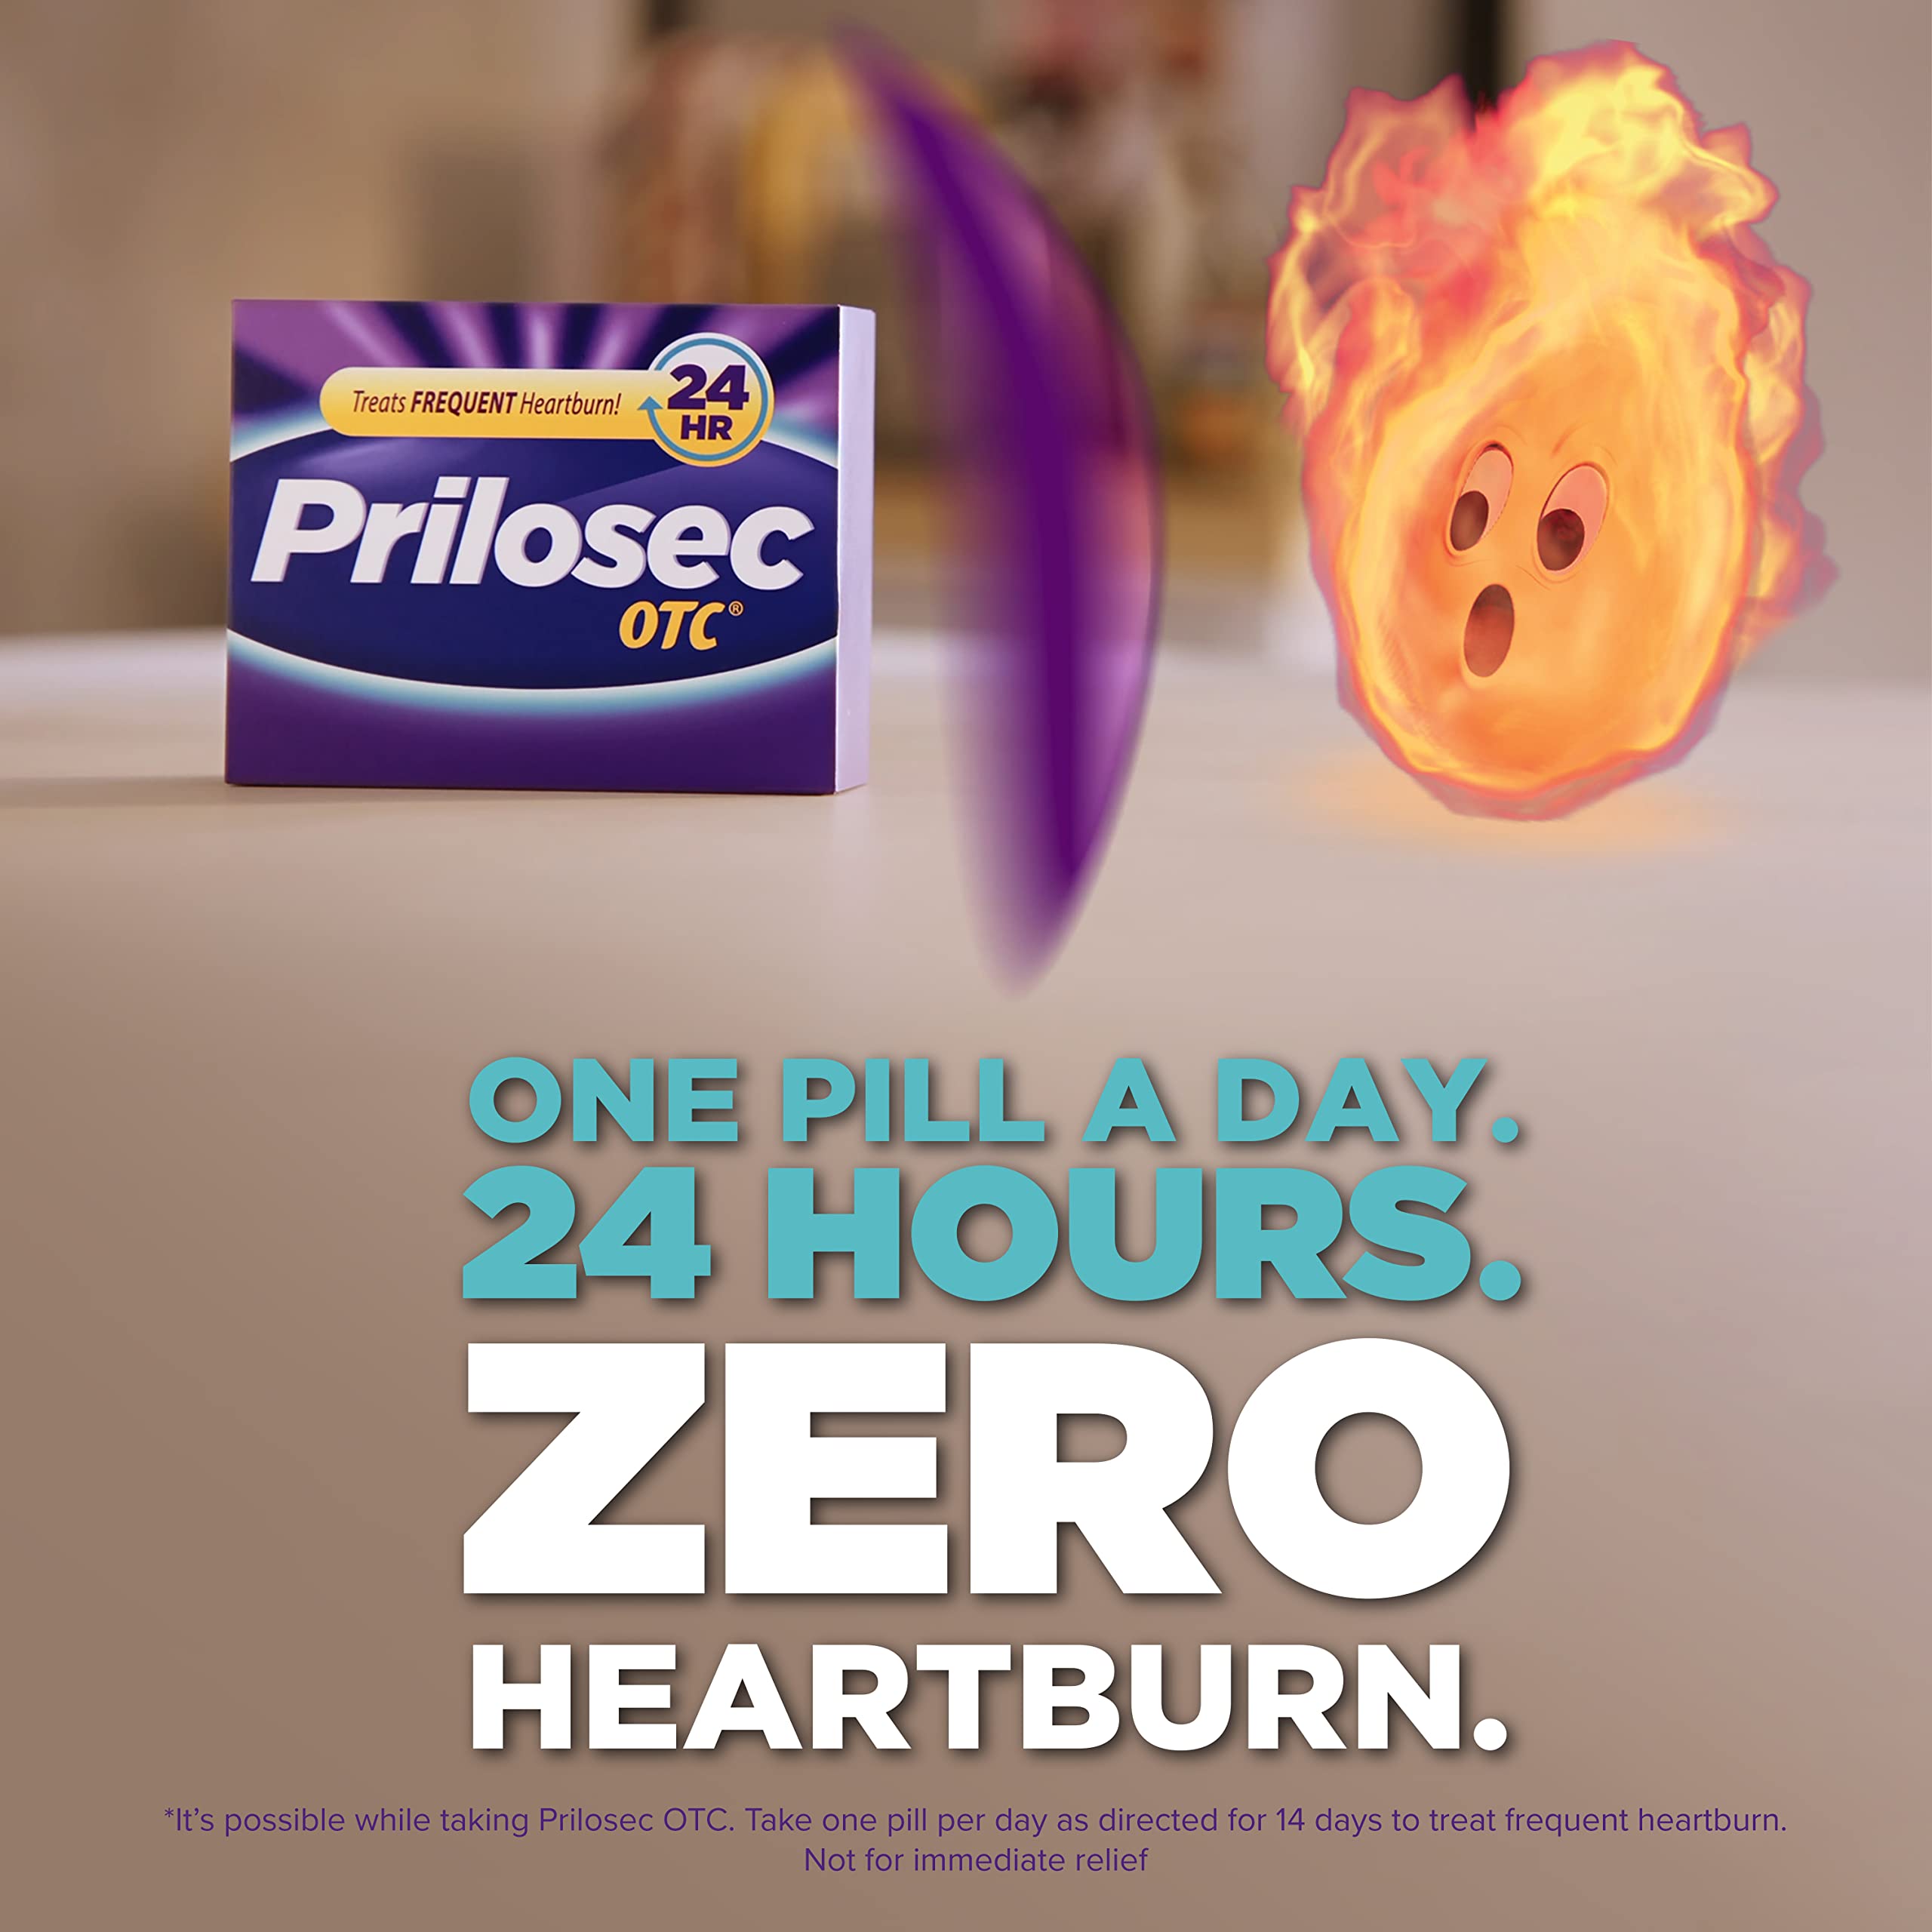 Prilosec OTC, Omeprazole Delayed Release 20mg, Acid Reducer, Treats Frequent Heartburn for 24 Hour Relief, All Day, All Night*, Wildberry Flavor, 20mg, 42 Tablets (Pack of 5)